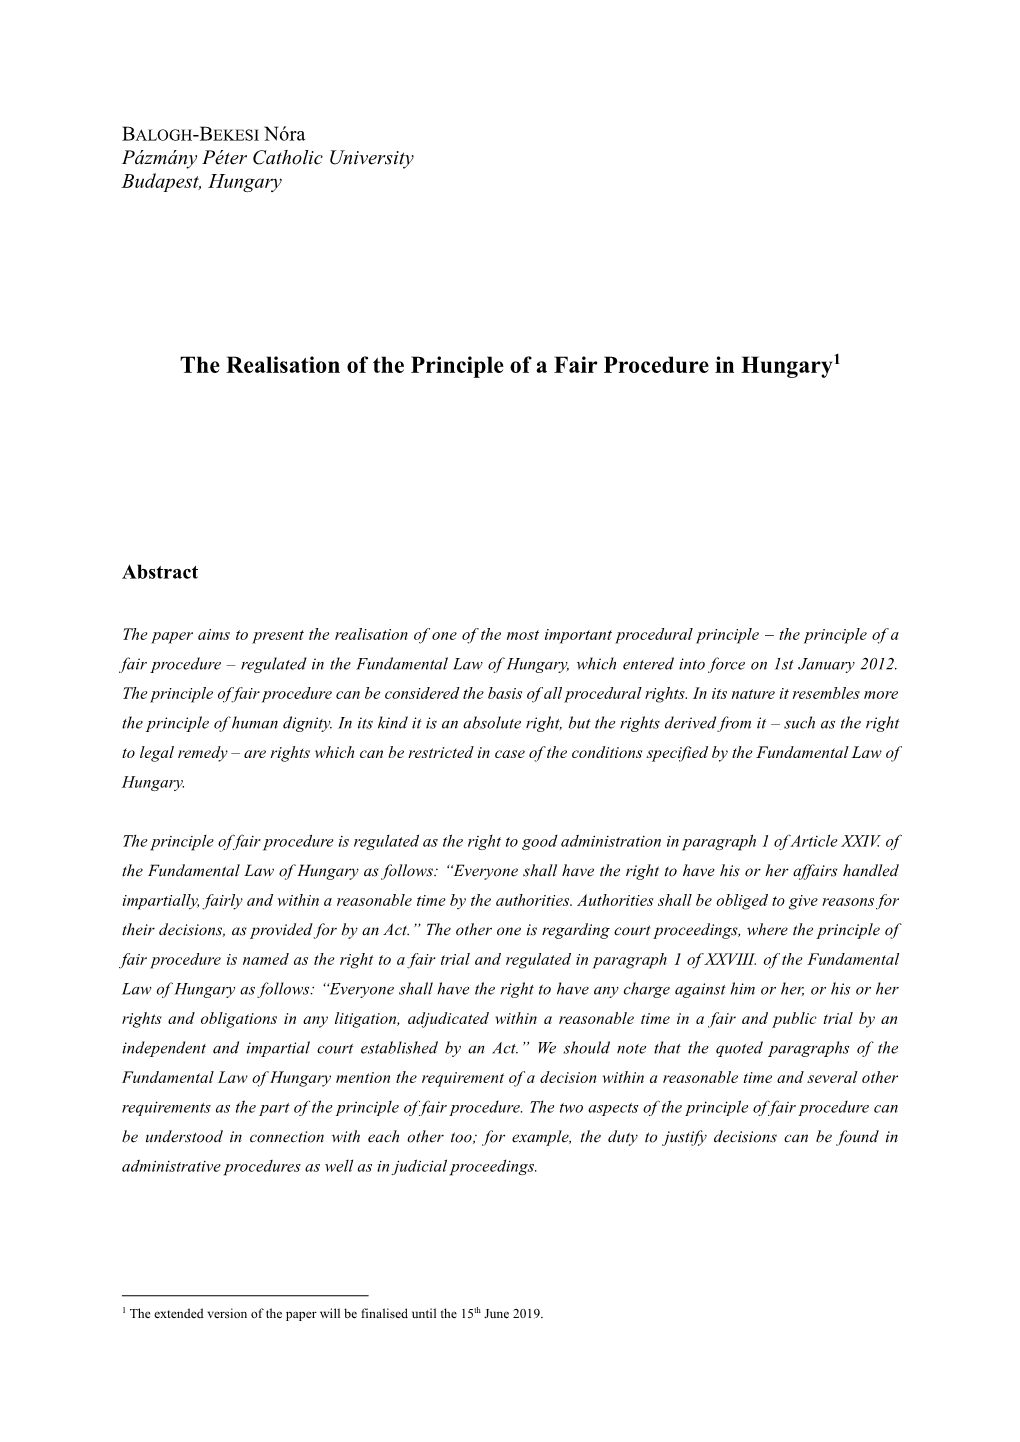 The Realisation of the Principle of a Fair Procedure in Hungary1